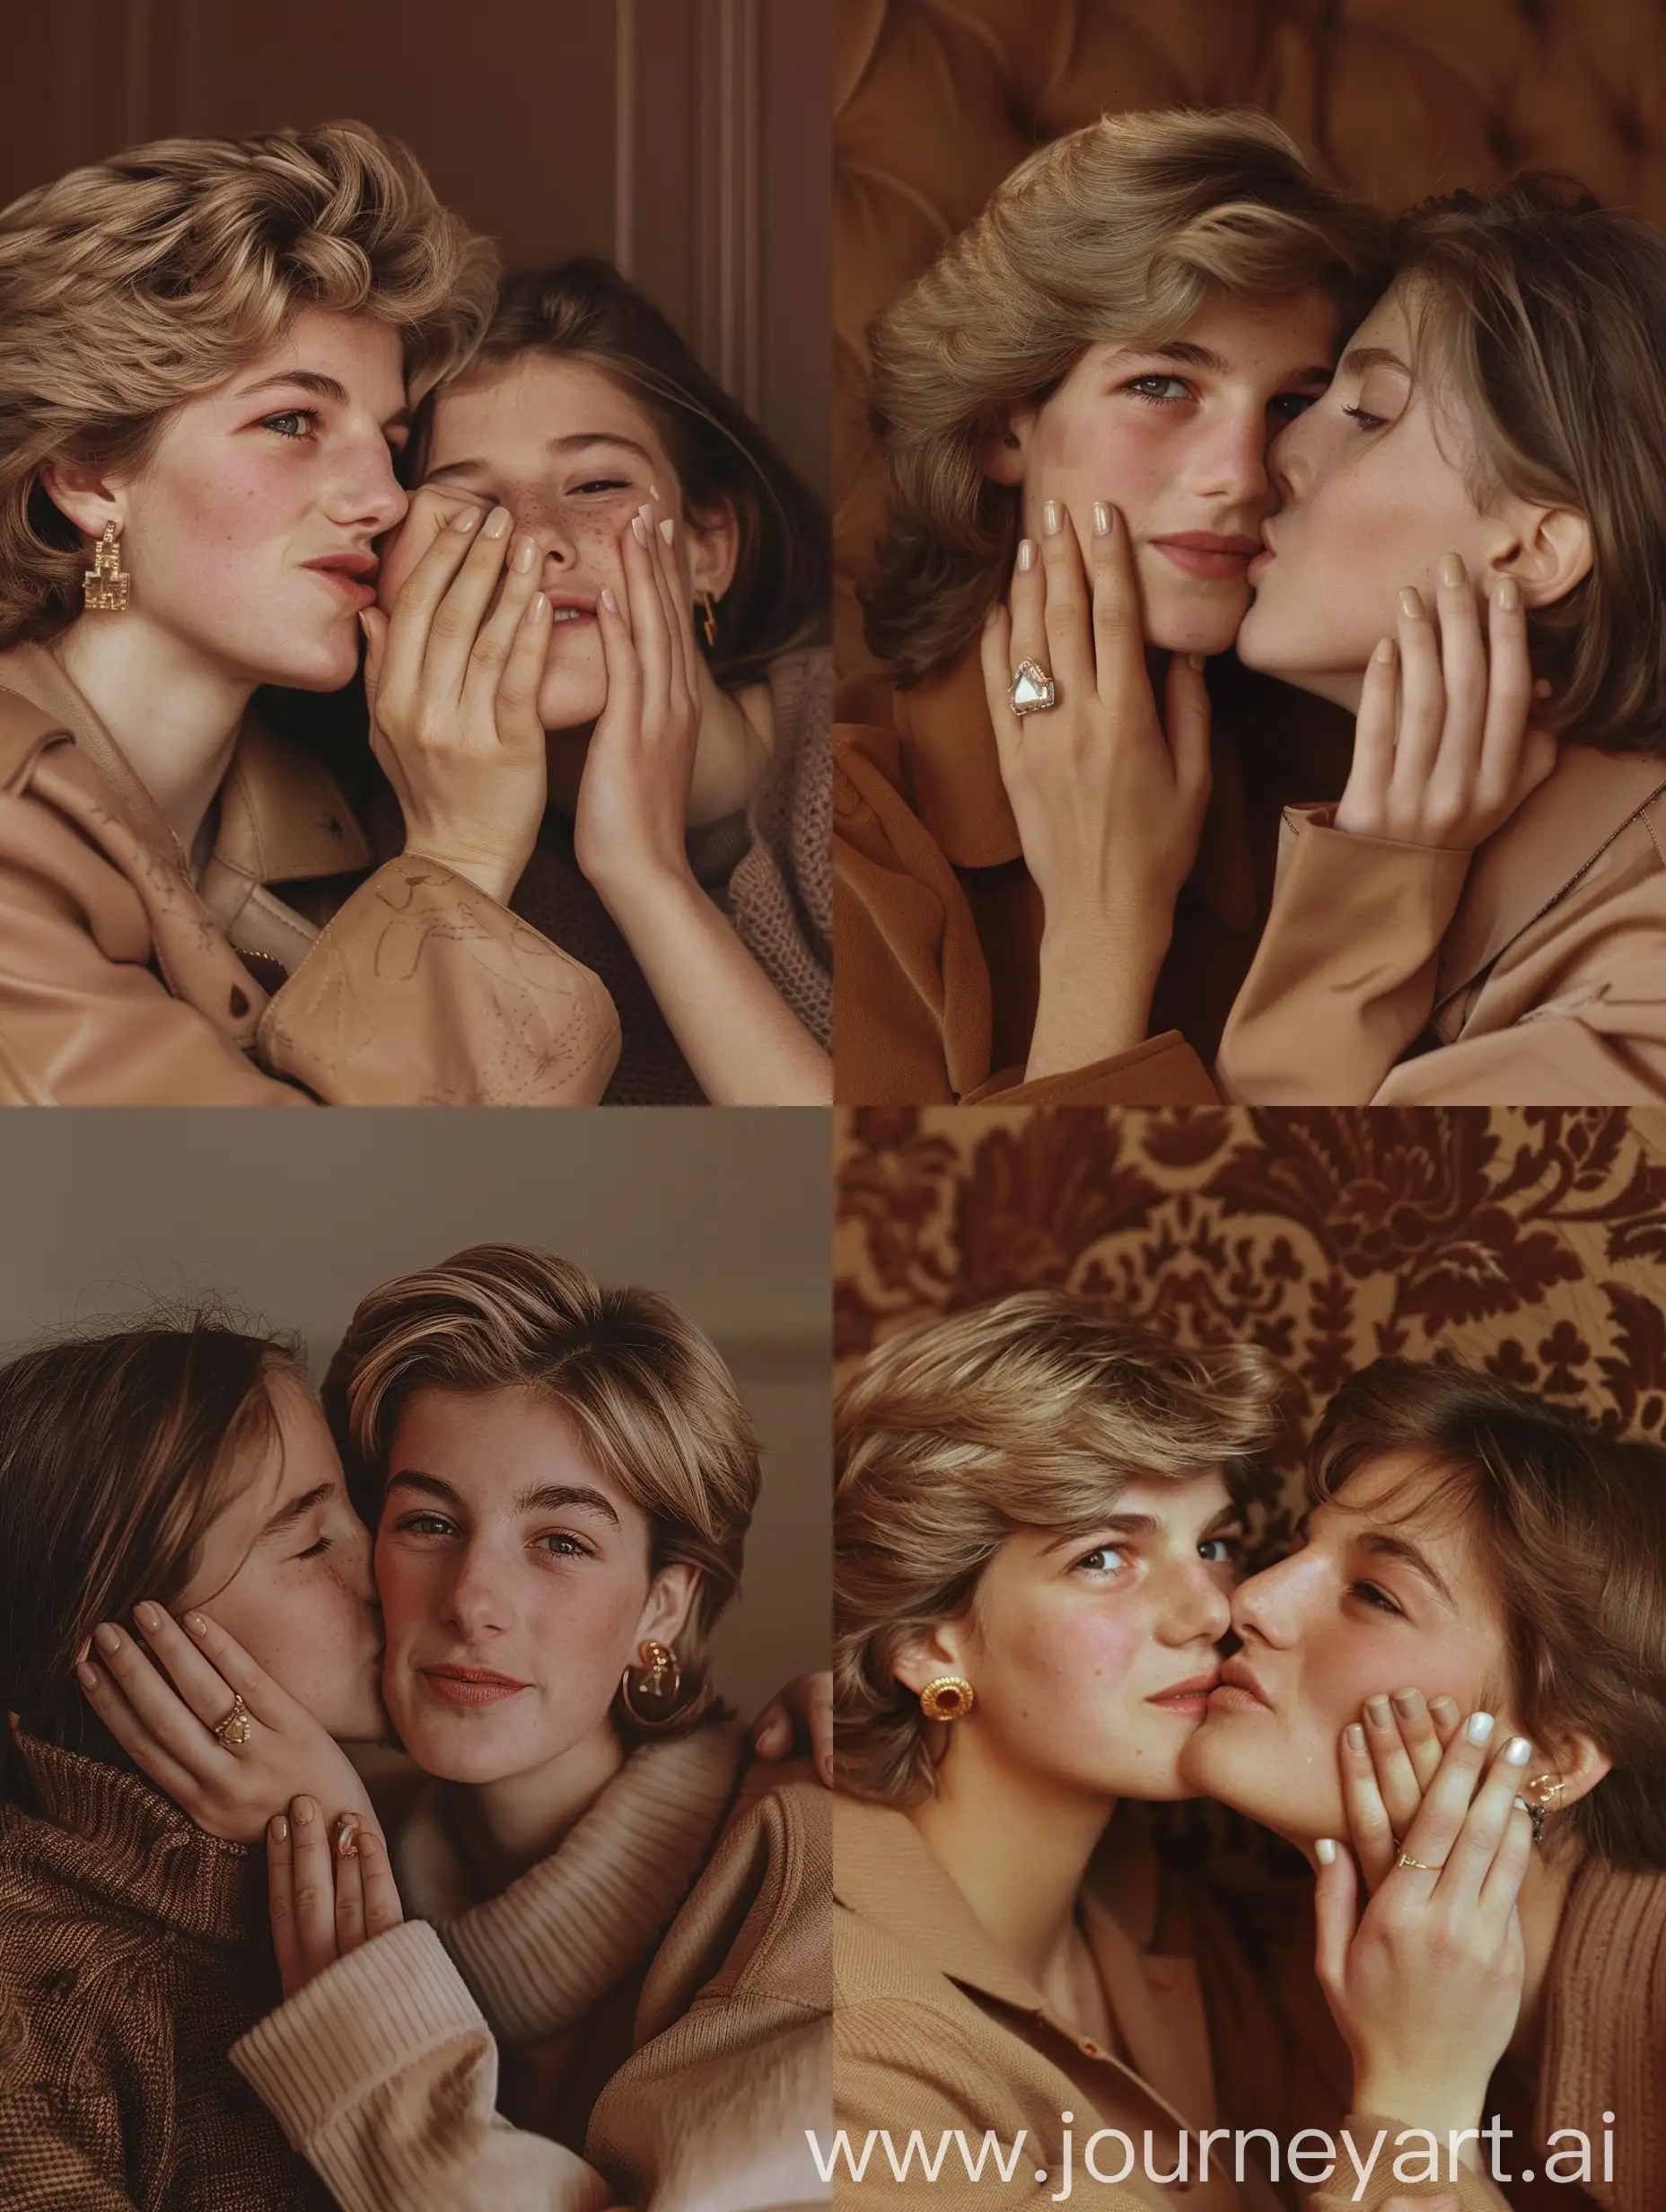 Aesthetic Instagram selfie of princess Diana with her teenage daughter, cute, kissing cheek, warm brown tones, one hand on the others cheek, manicured, beige gel nail polish